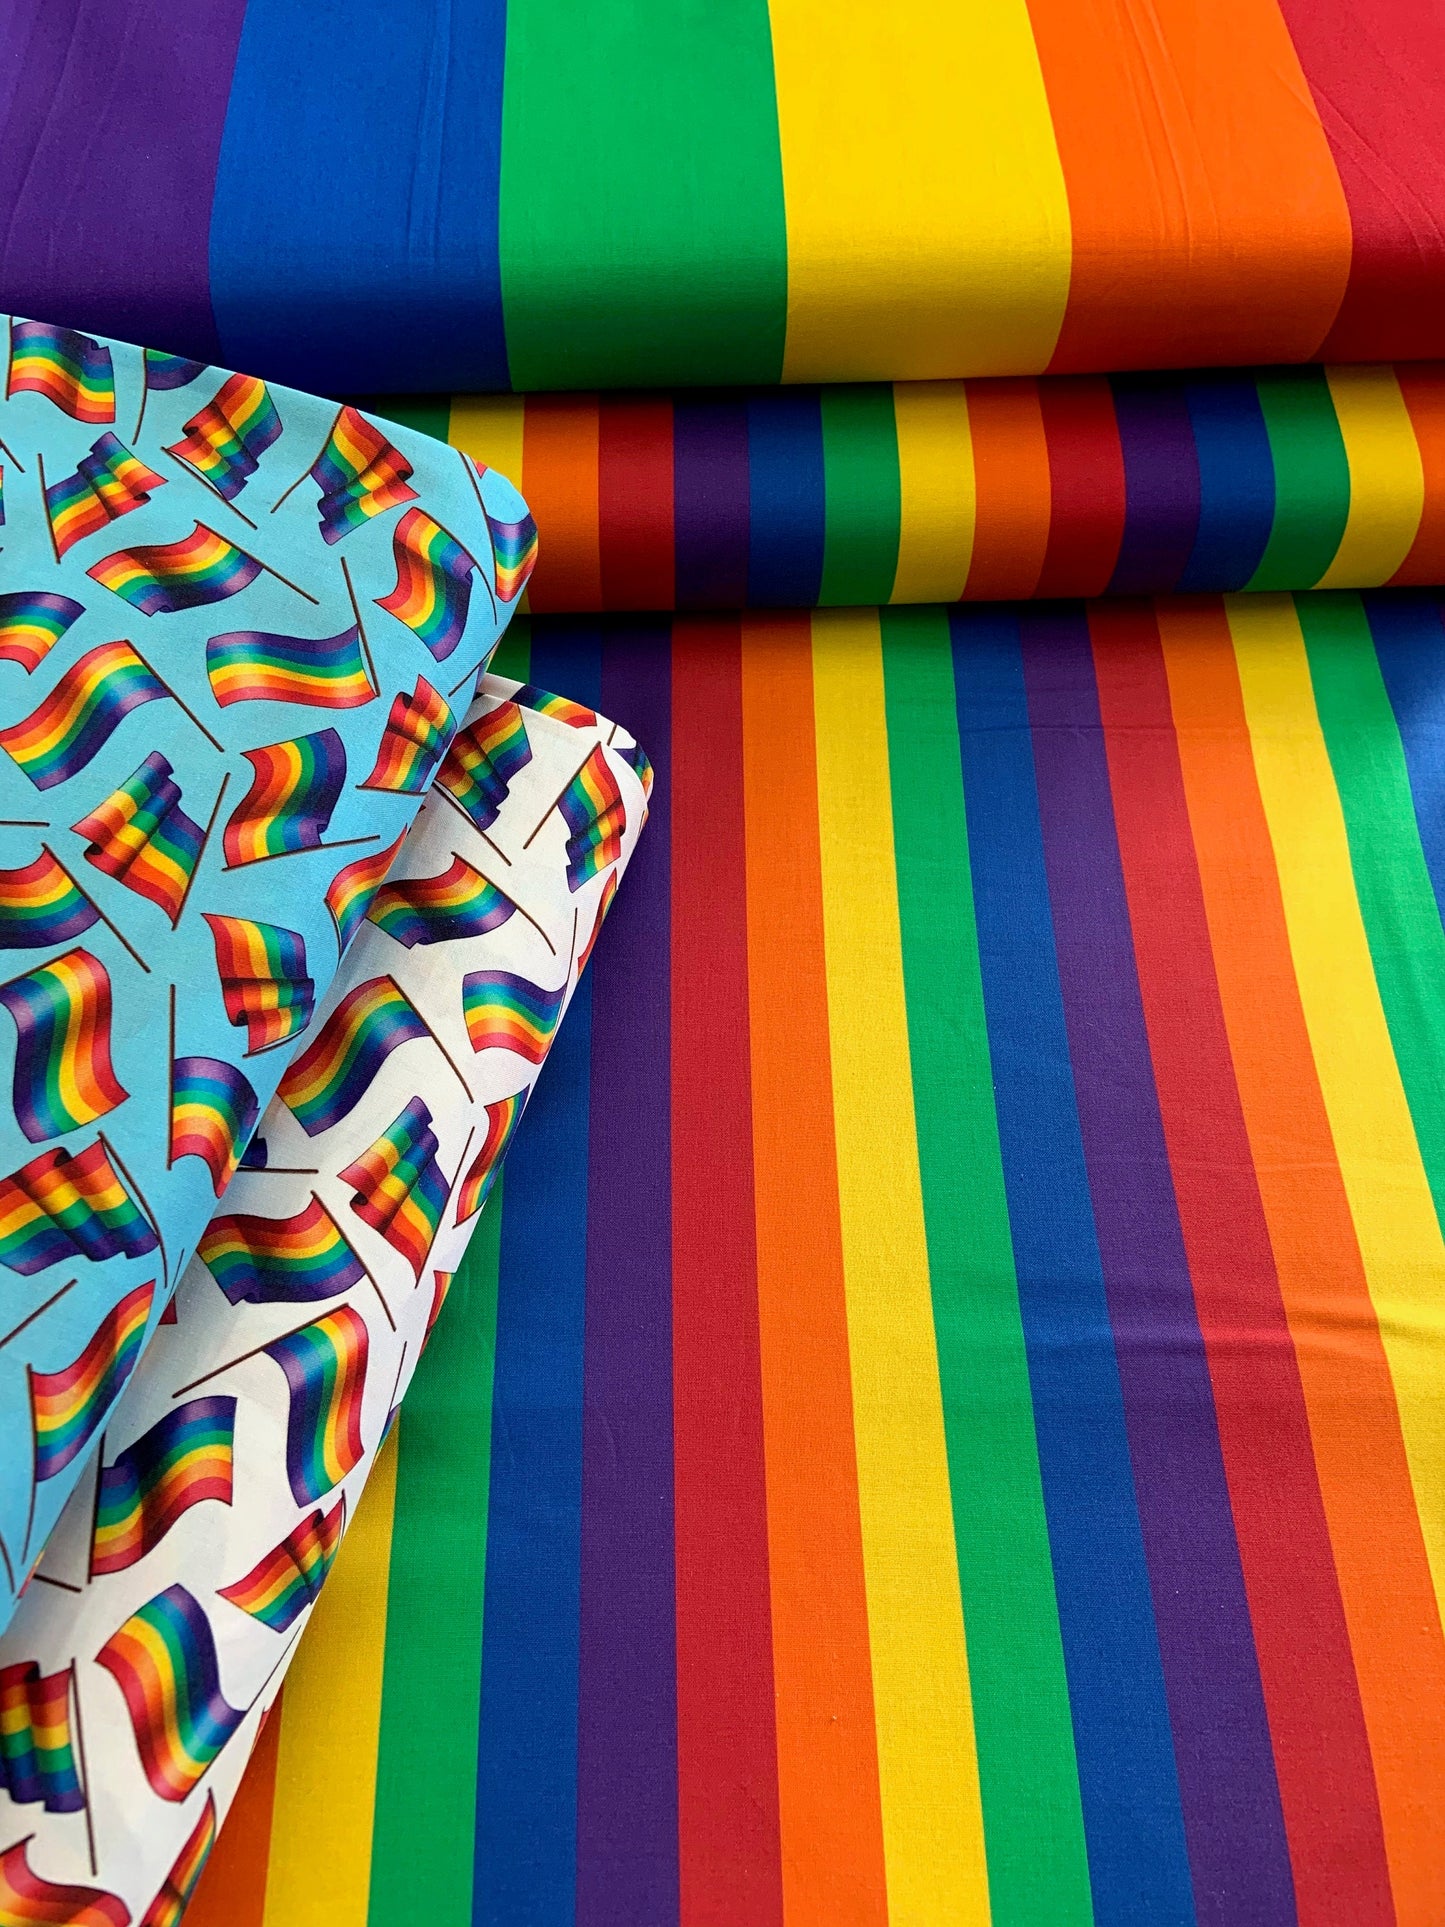 This & That II Rainbow Stripe Narrow (Each stripe is about 1" wide) 27450X Cotton Woven Fabric